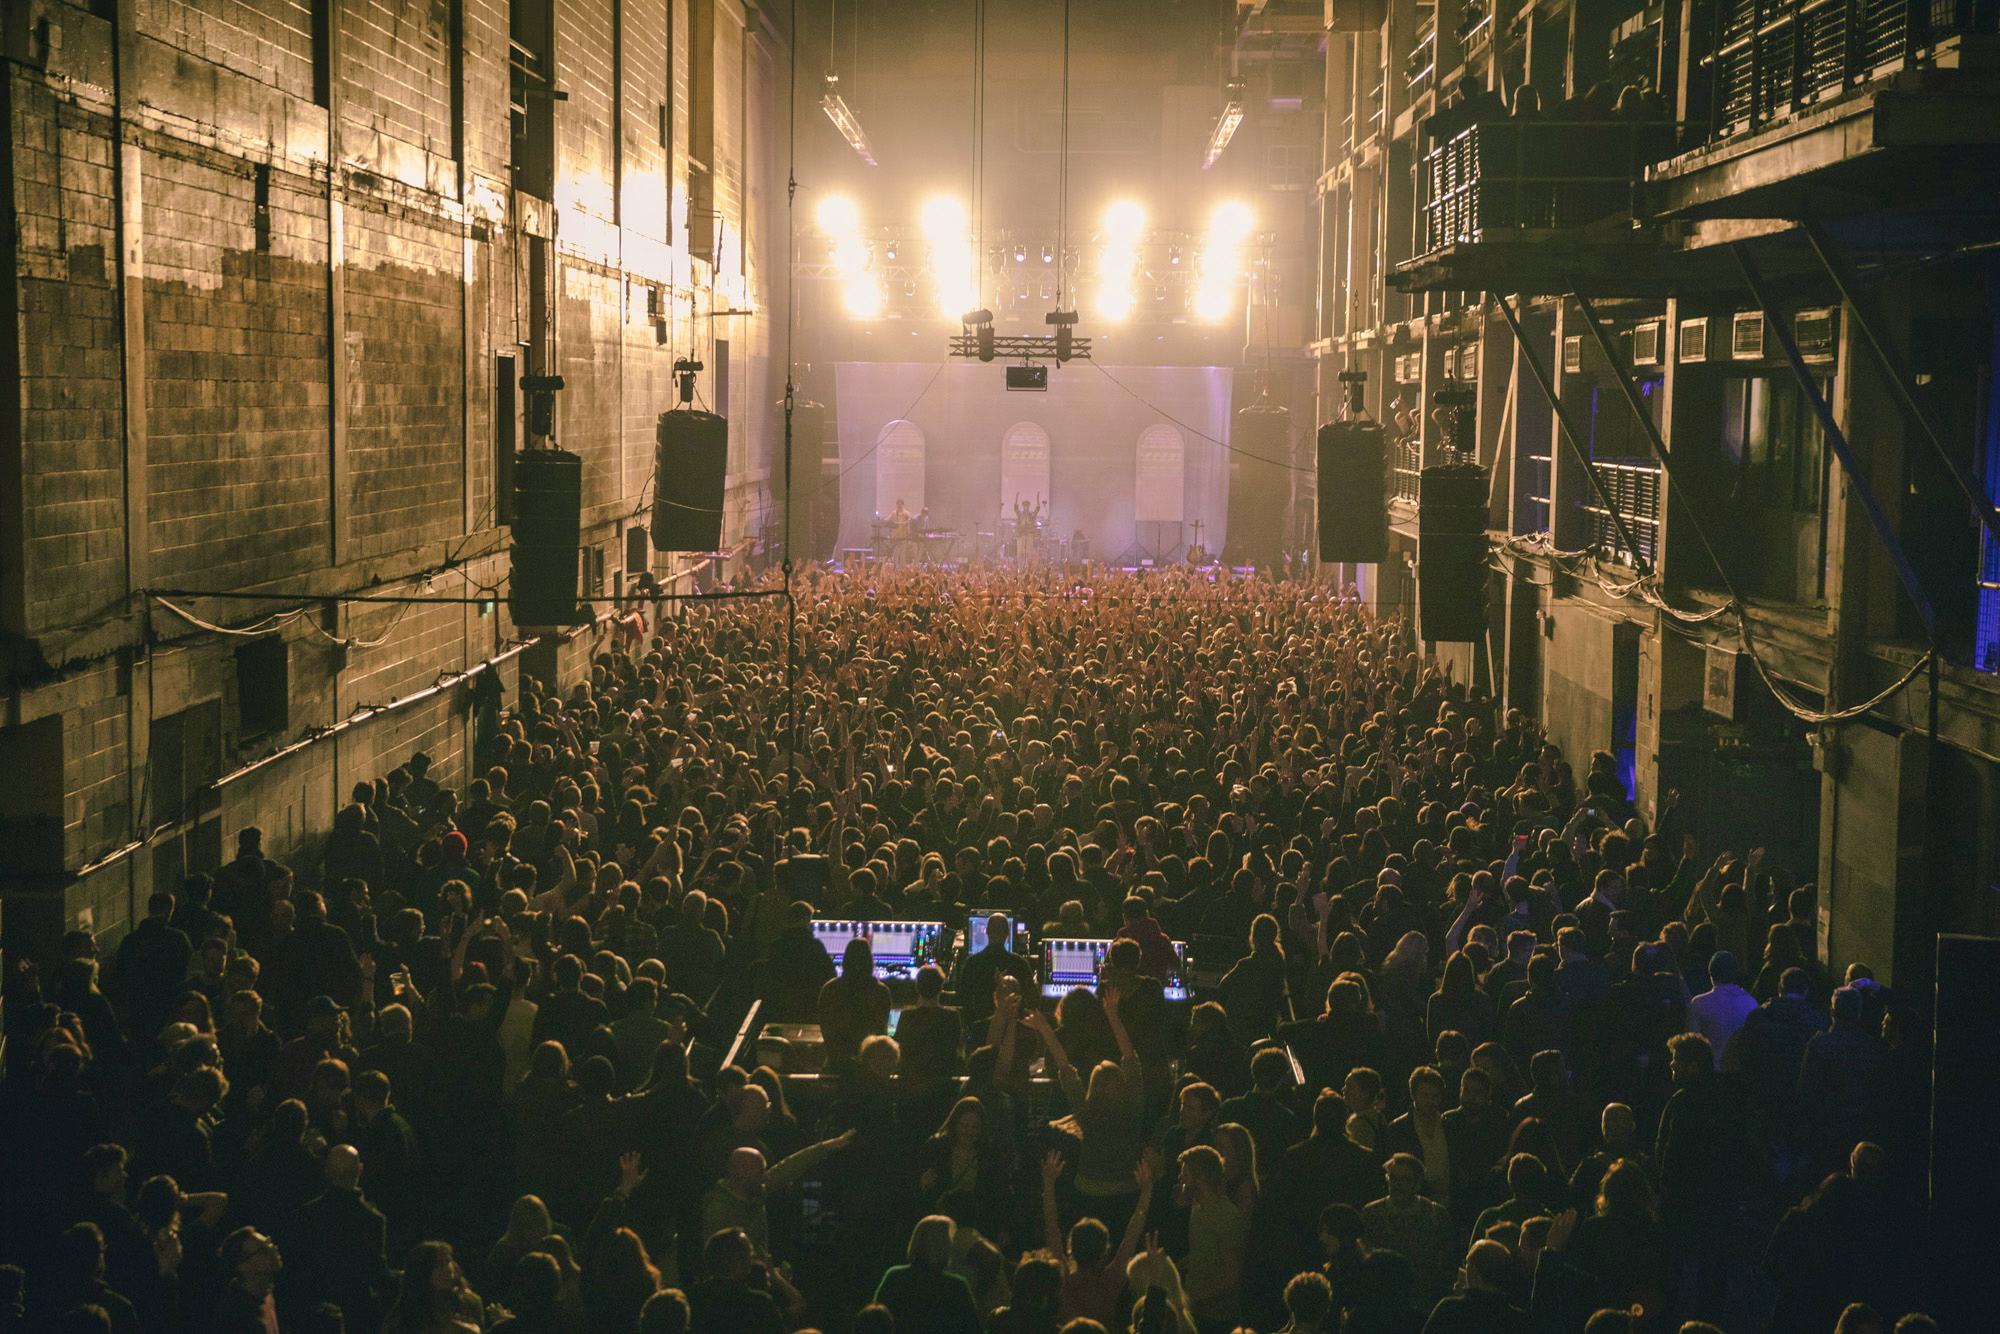 Printworks london events private hire corporate bookings groups live room credit giles smith concerts large music venues